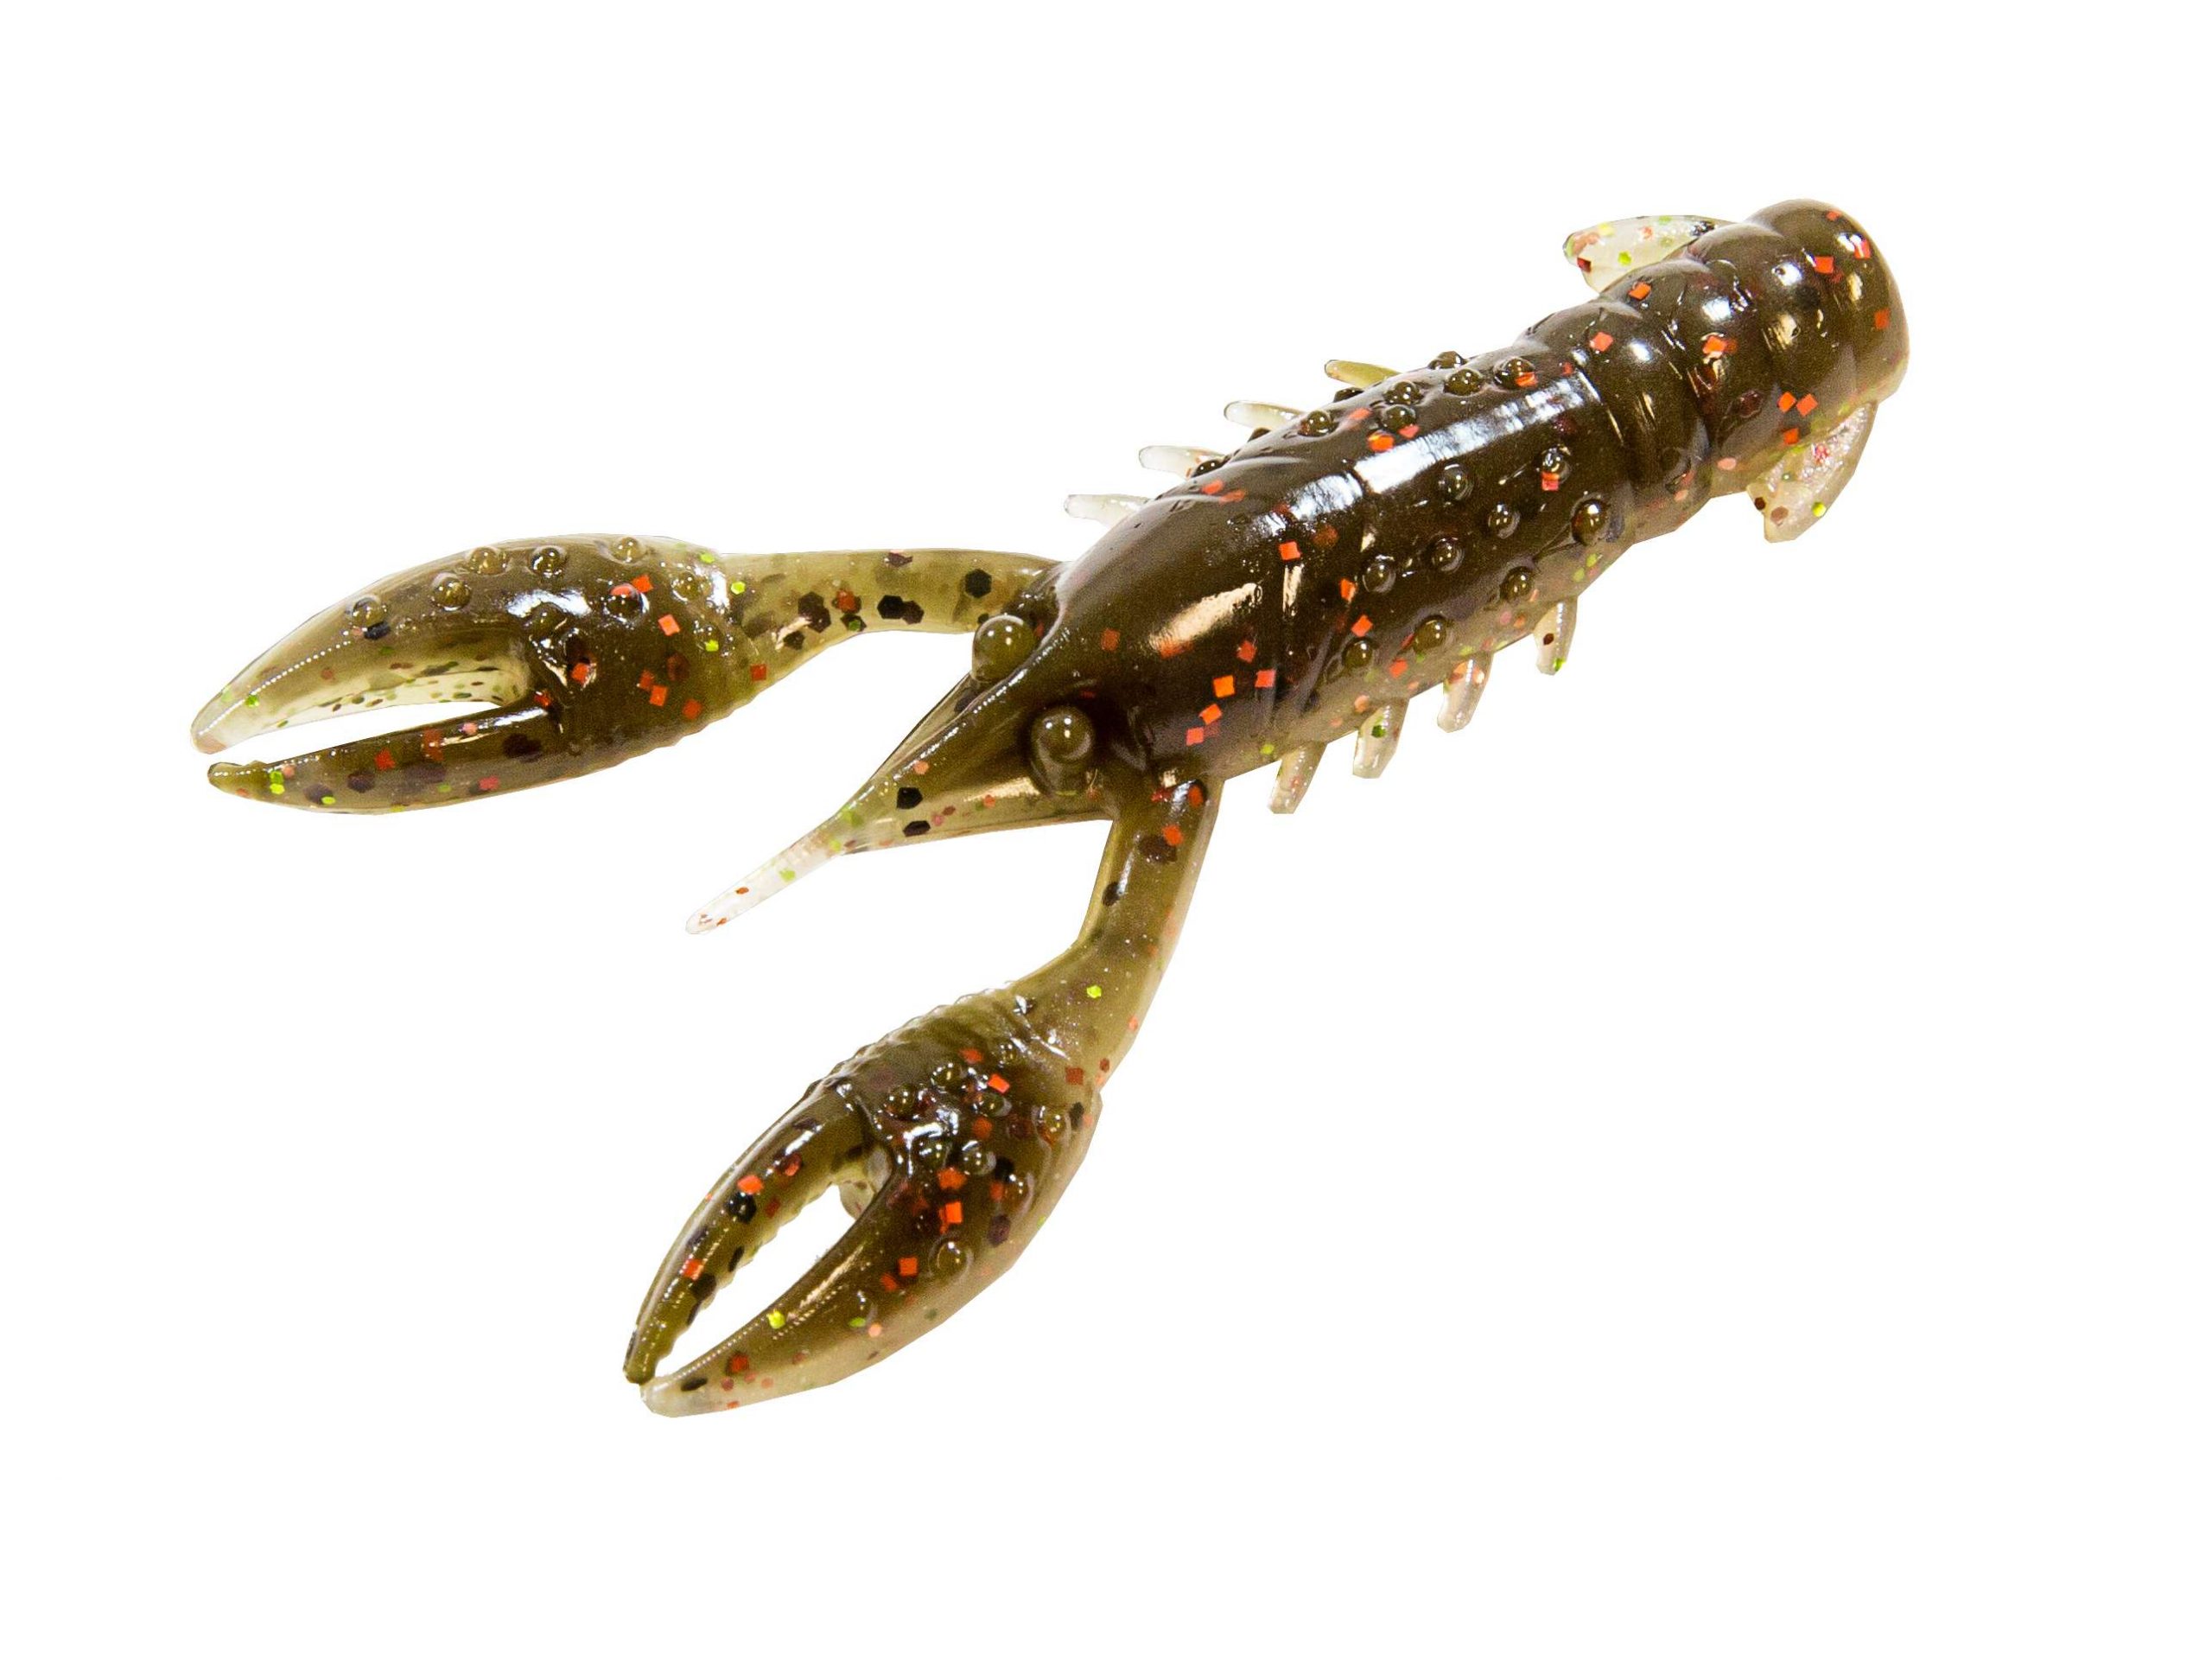 Finesse TRD CrawZ<br>
Z-Man	<br>
$4.49<br>
Advancing the Ned Rig into the realm of realism, Z-Man has revealed its next-gen finesse bait, the TRD CrawZ. Anatomical elements of the CrawZ boost visual appeal and enable crayfish-centric propulsion. A flared, tucked-under tail and flat belly accentuate gliding action on the descentâthe same subtle hover-drop motion preferred by finesse fans. Beady little crayfish eyes, segmented thorax and true-to-life swimmerets elevate eye candy and add secondary layers of movement. Bulbous, buoyant claws float away from the baitâs body at rest and flap with twitches of the rodtip--a near-perfect mimic of a crayfishâs natural defensive reaction. 
Composed of Z-Manâs popular, progressive ElaZtech material, the Finesse TRD CrawZ boasts unbelievable durability, surprising softness and high relative buoyancyâa property that breathes life and realism into the finesse crawfish bait. Available in six-packs in ten radical patterns, including Canada Craw, Molting Craw and The Deal, Z-Manâs 2 1/2-inch Finesse TRD CrawZ lands at outdoor retailers in July. 
